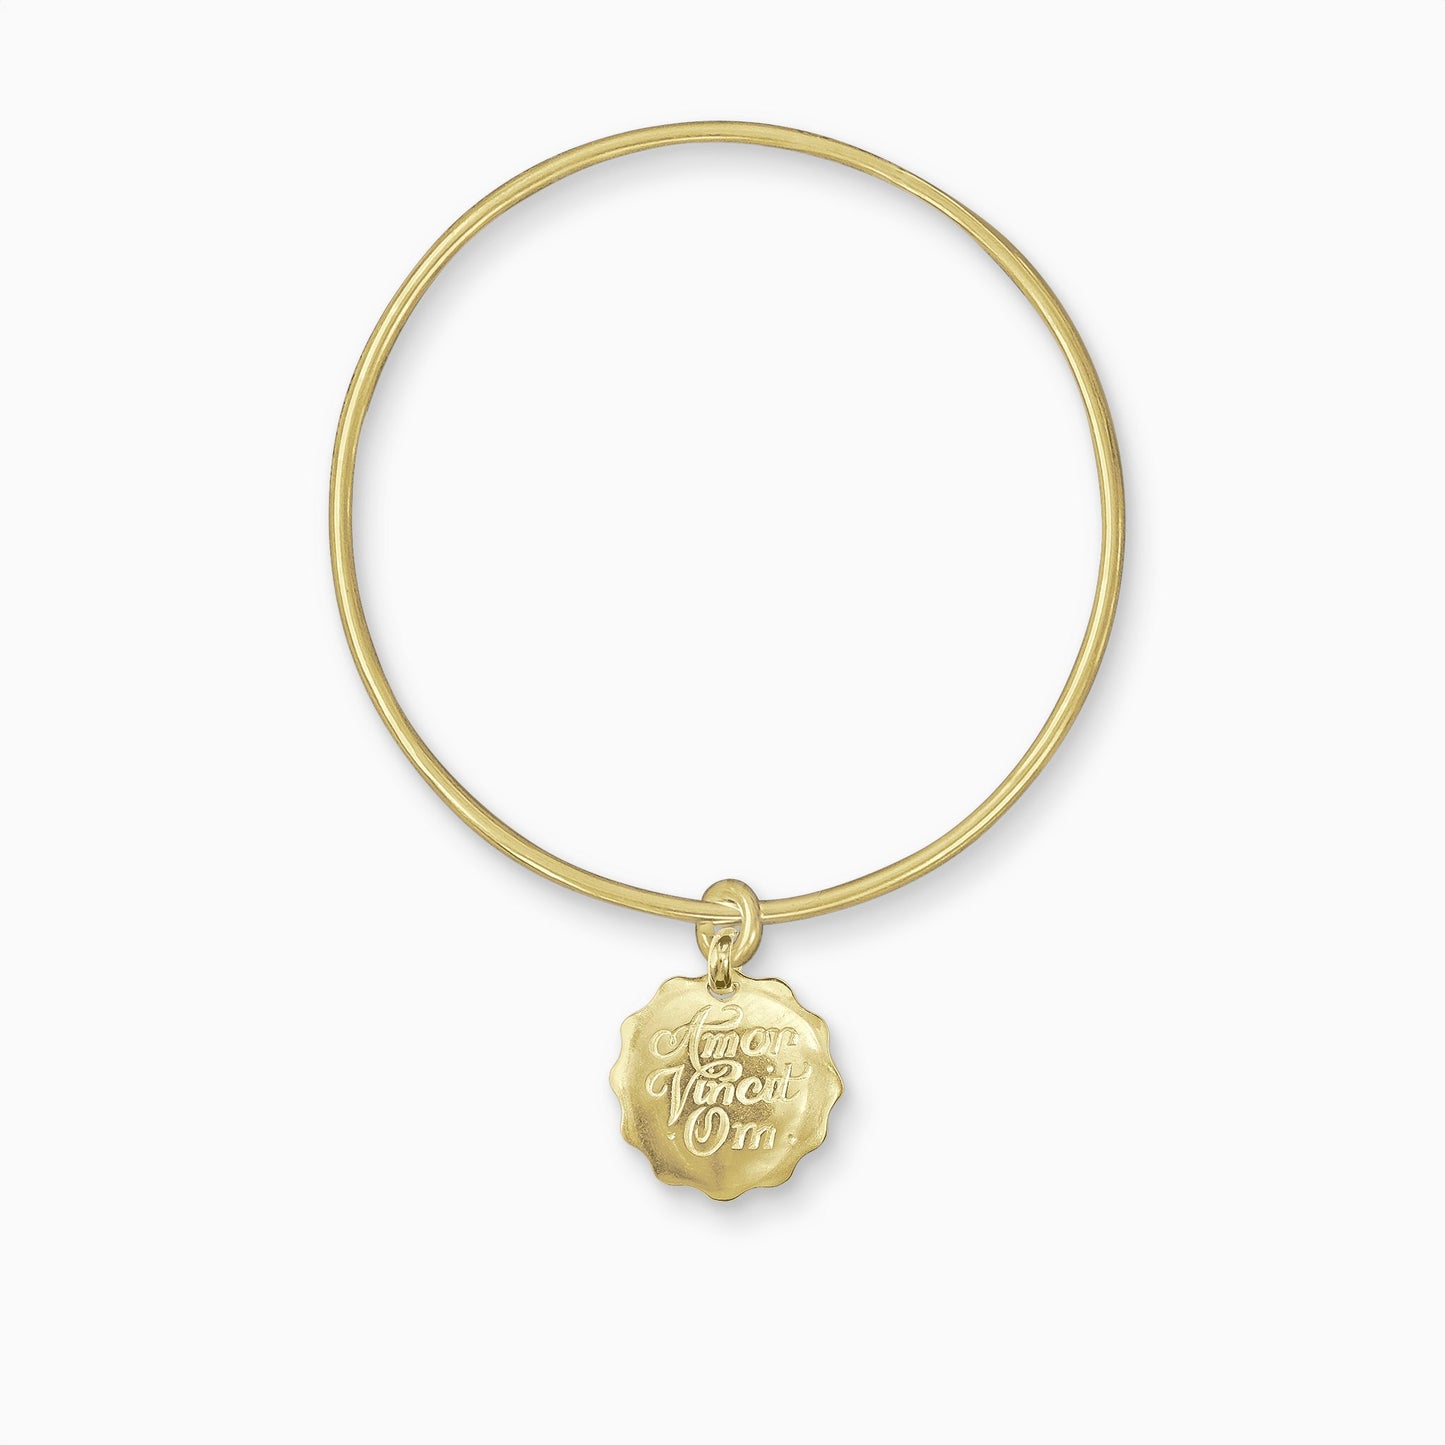 An 18ct Fairtrade yellow gold round, smooth charm with a wavy edge engraved with ‘Love Conquers All’ in Latin, freely moving on a round wire bangle.  Charm 22mm. Bangle, 63mm inside diameter x 2mm round wire.